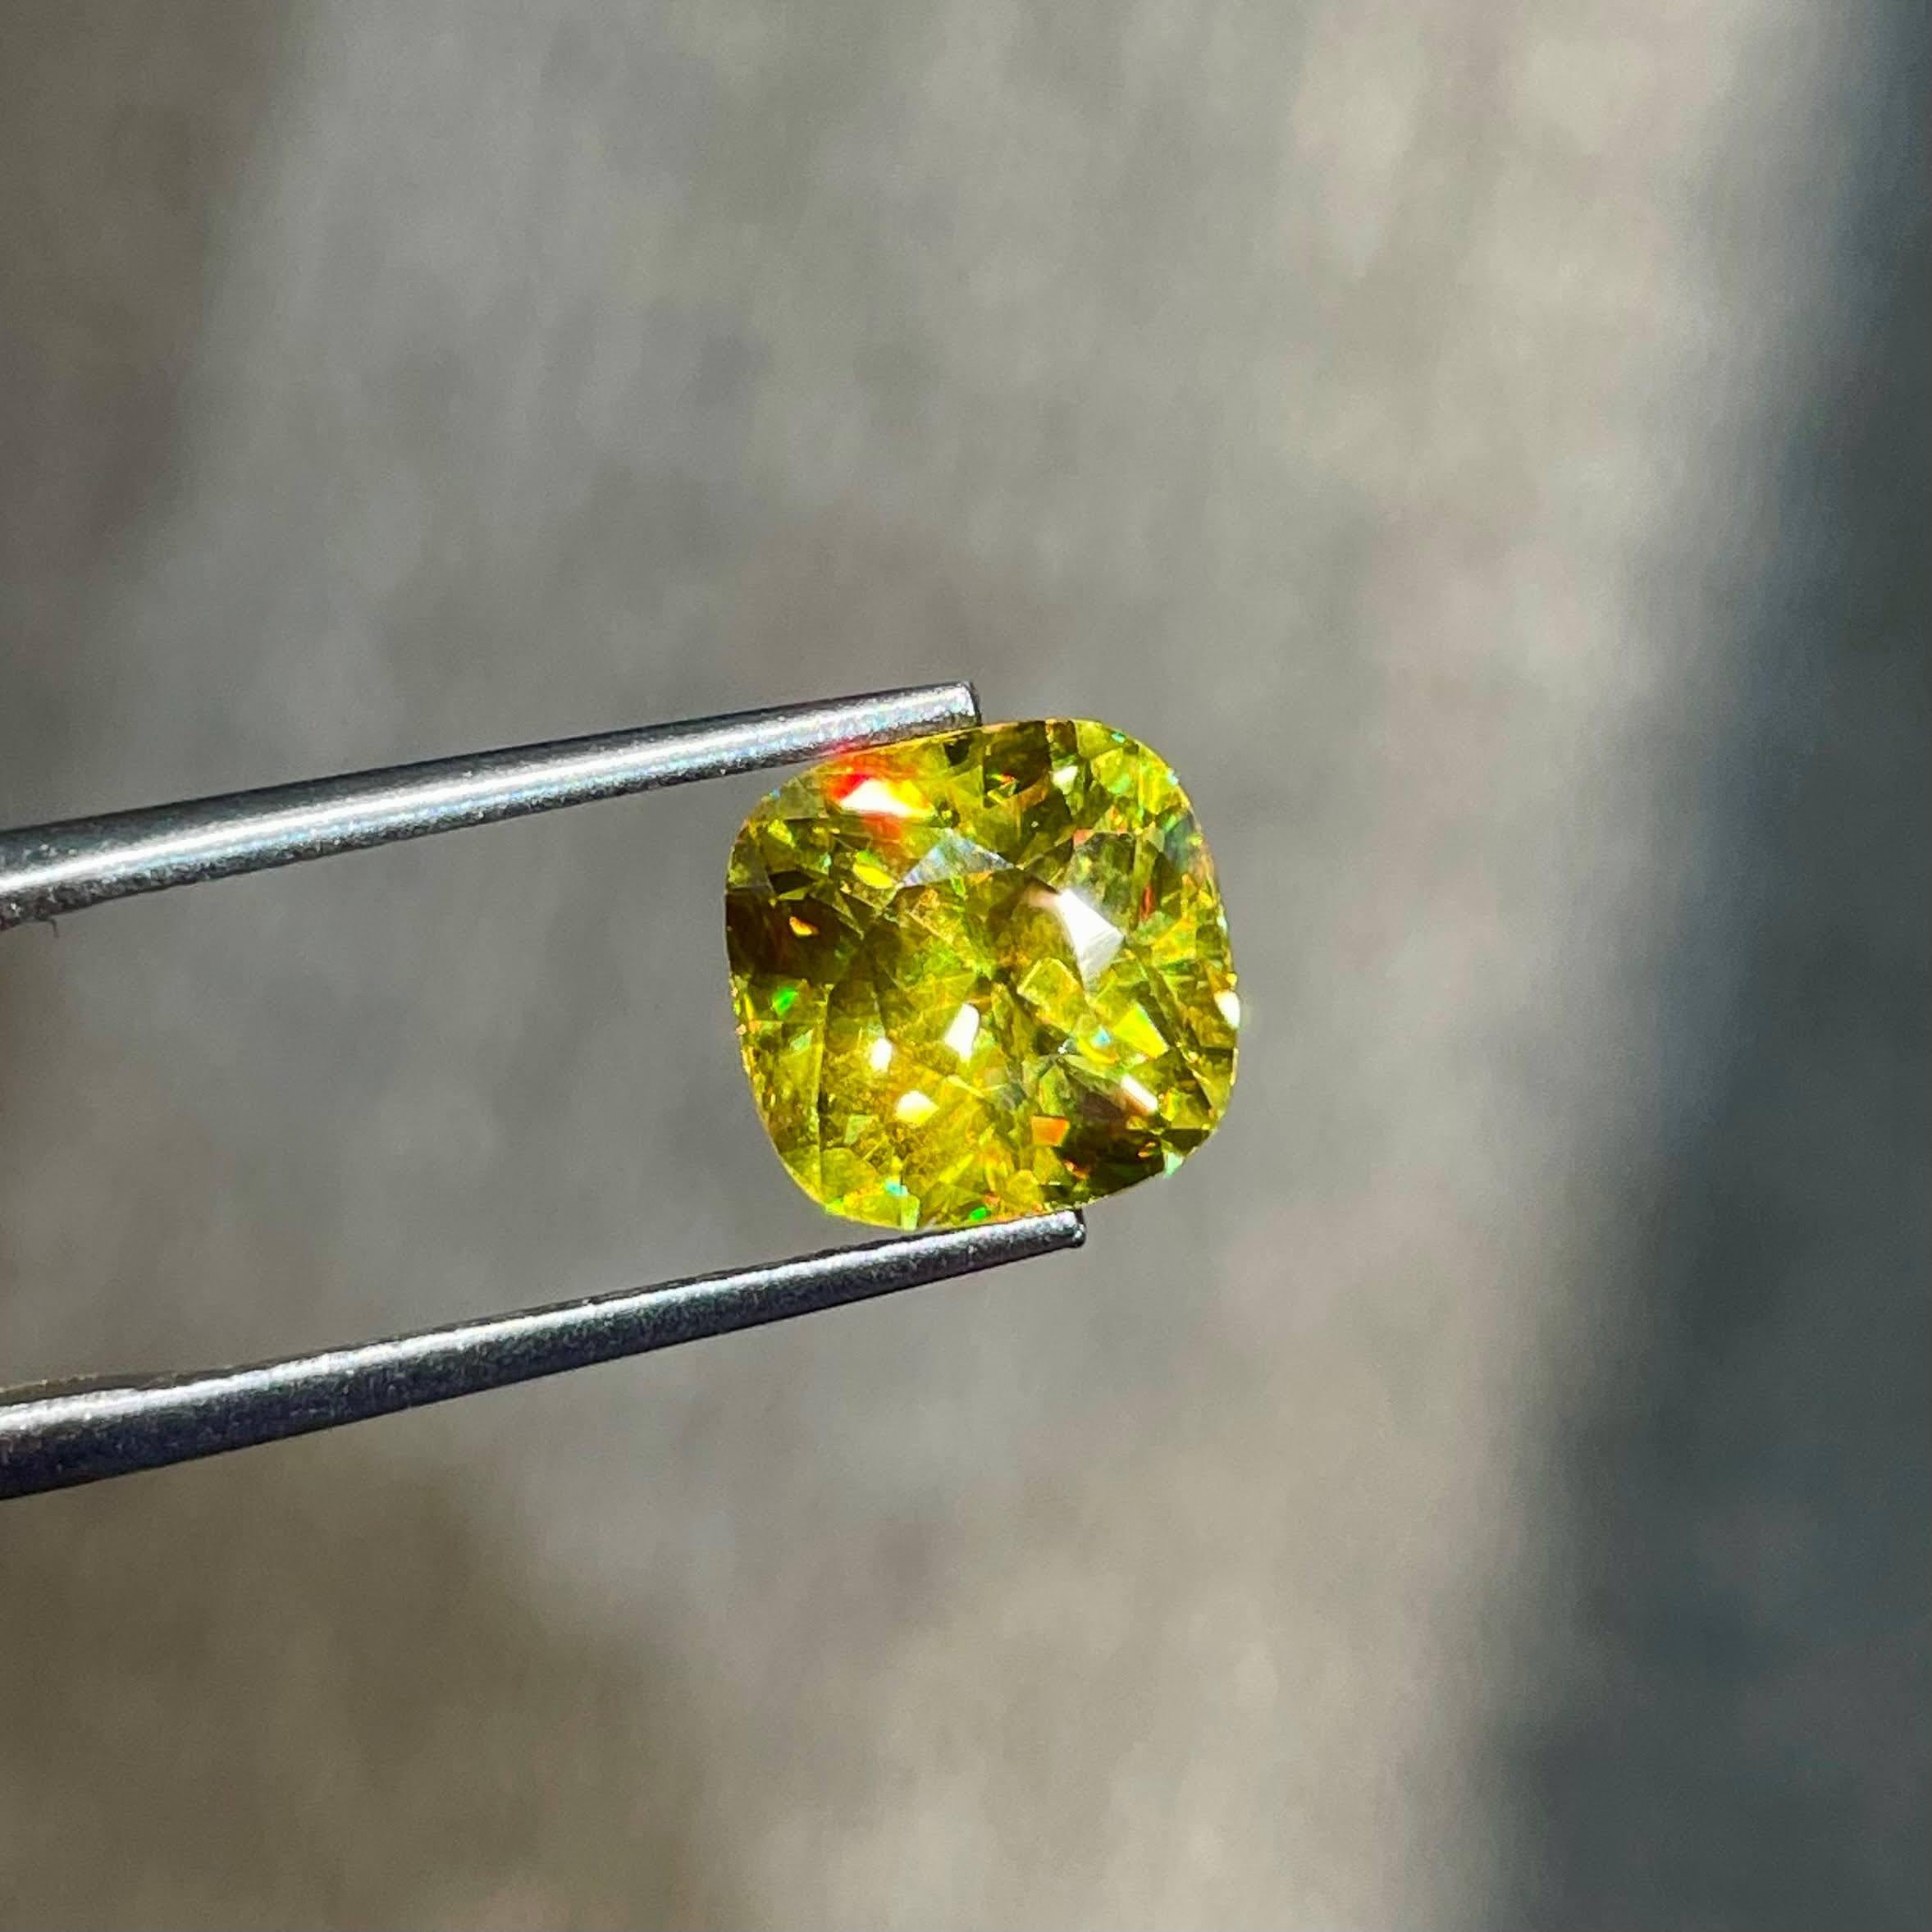 Weight 4.45 carats 
Dimensions 9.1x9.0x6.8 mm
Treatment none 
Origin Madagascar 
Clarity VVS
Shape cushion 
Cut fancy cushion




In the realm of exquisite gemstones, a dazzling 4.45 carat Sphene takes center stage, showcasing the epitome of top